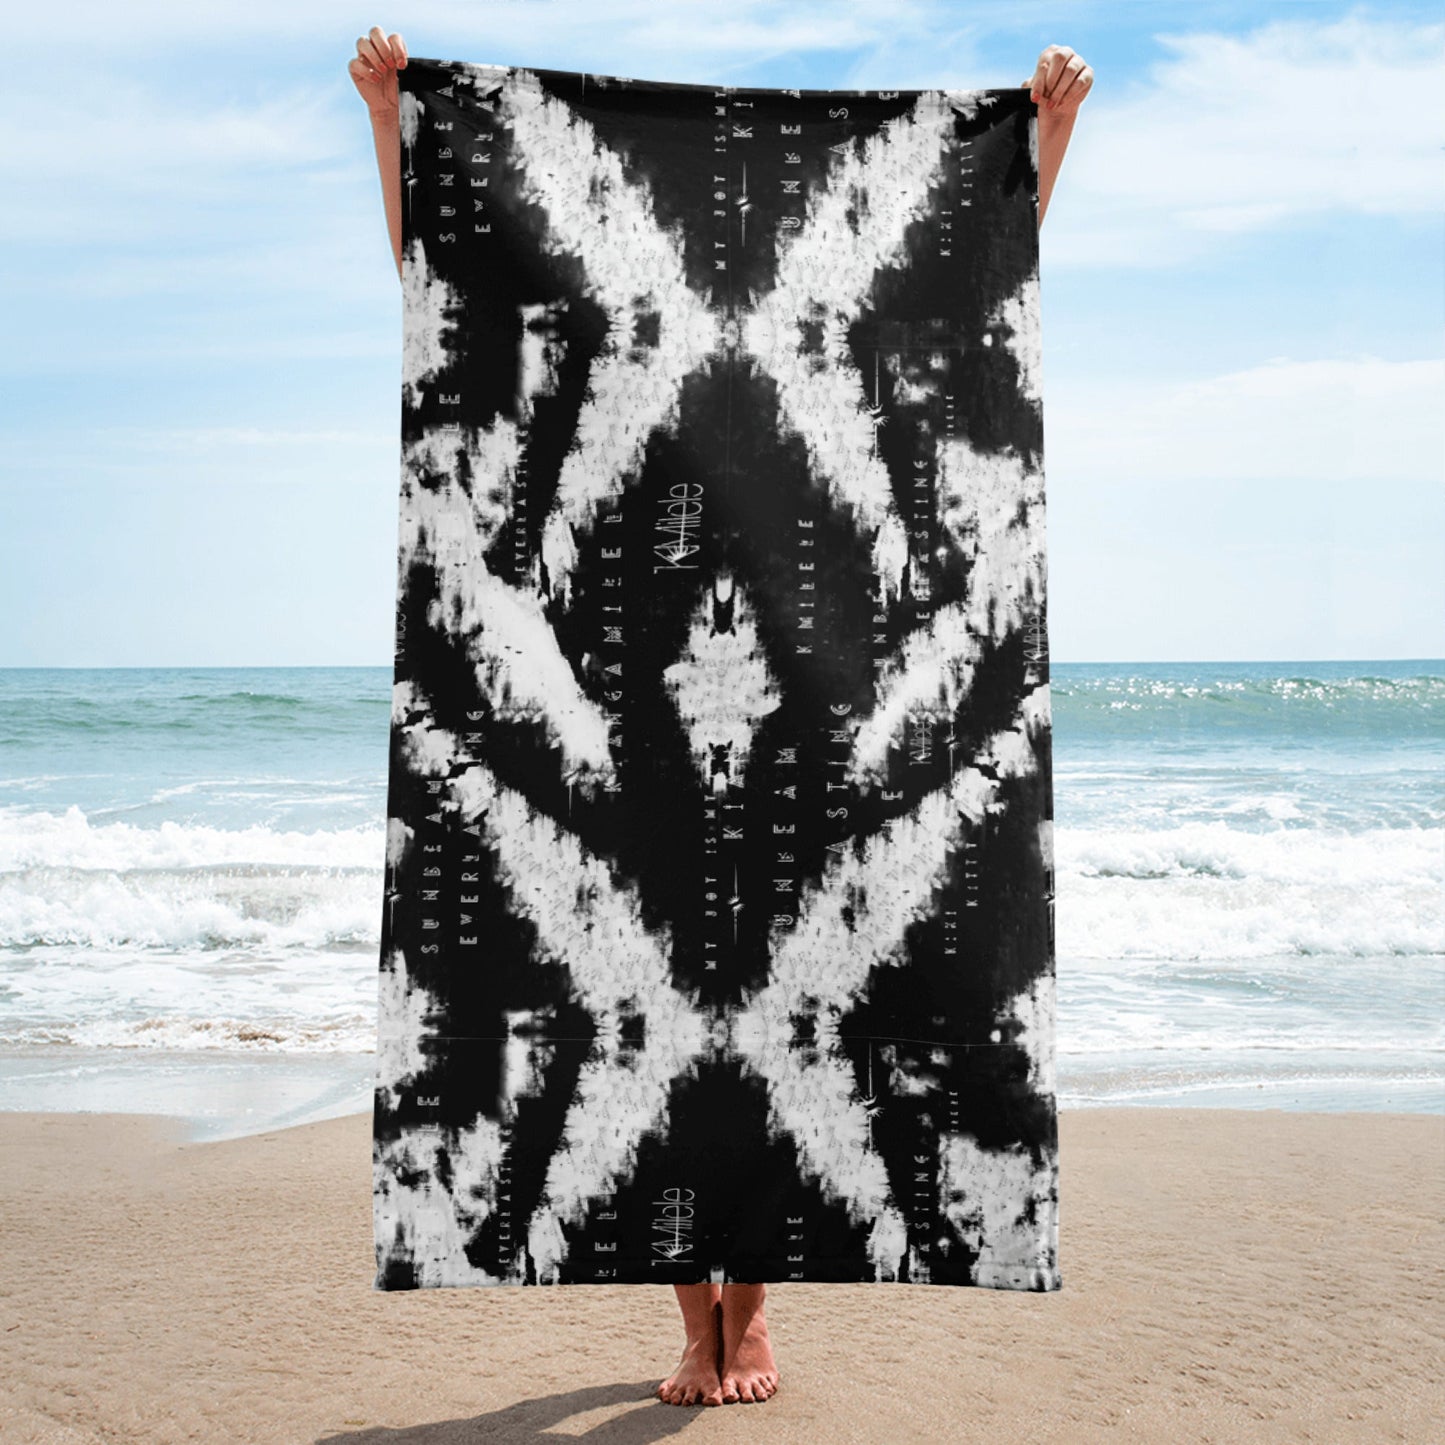 Beach Towel - Let me Fly - 25% Off